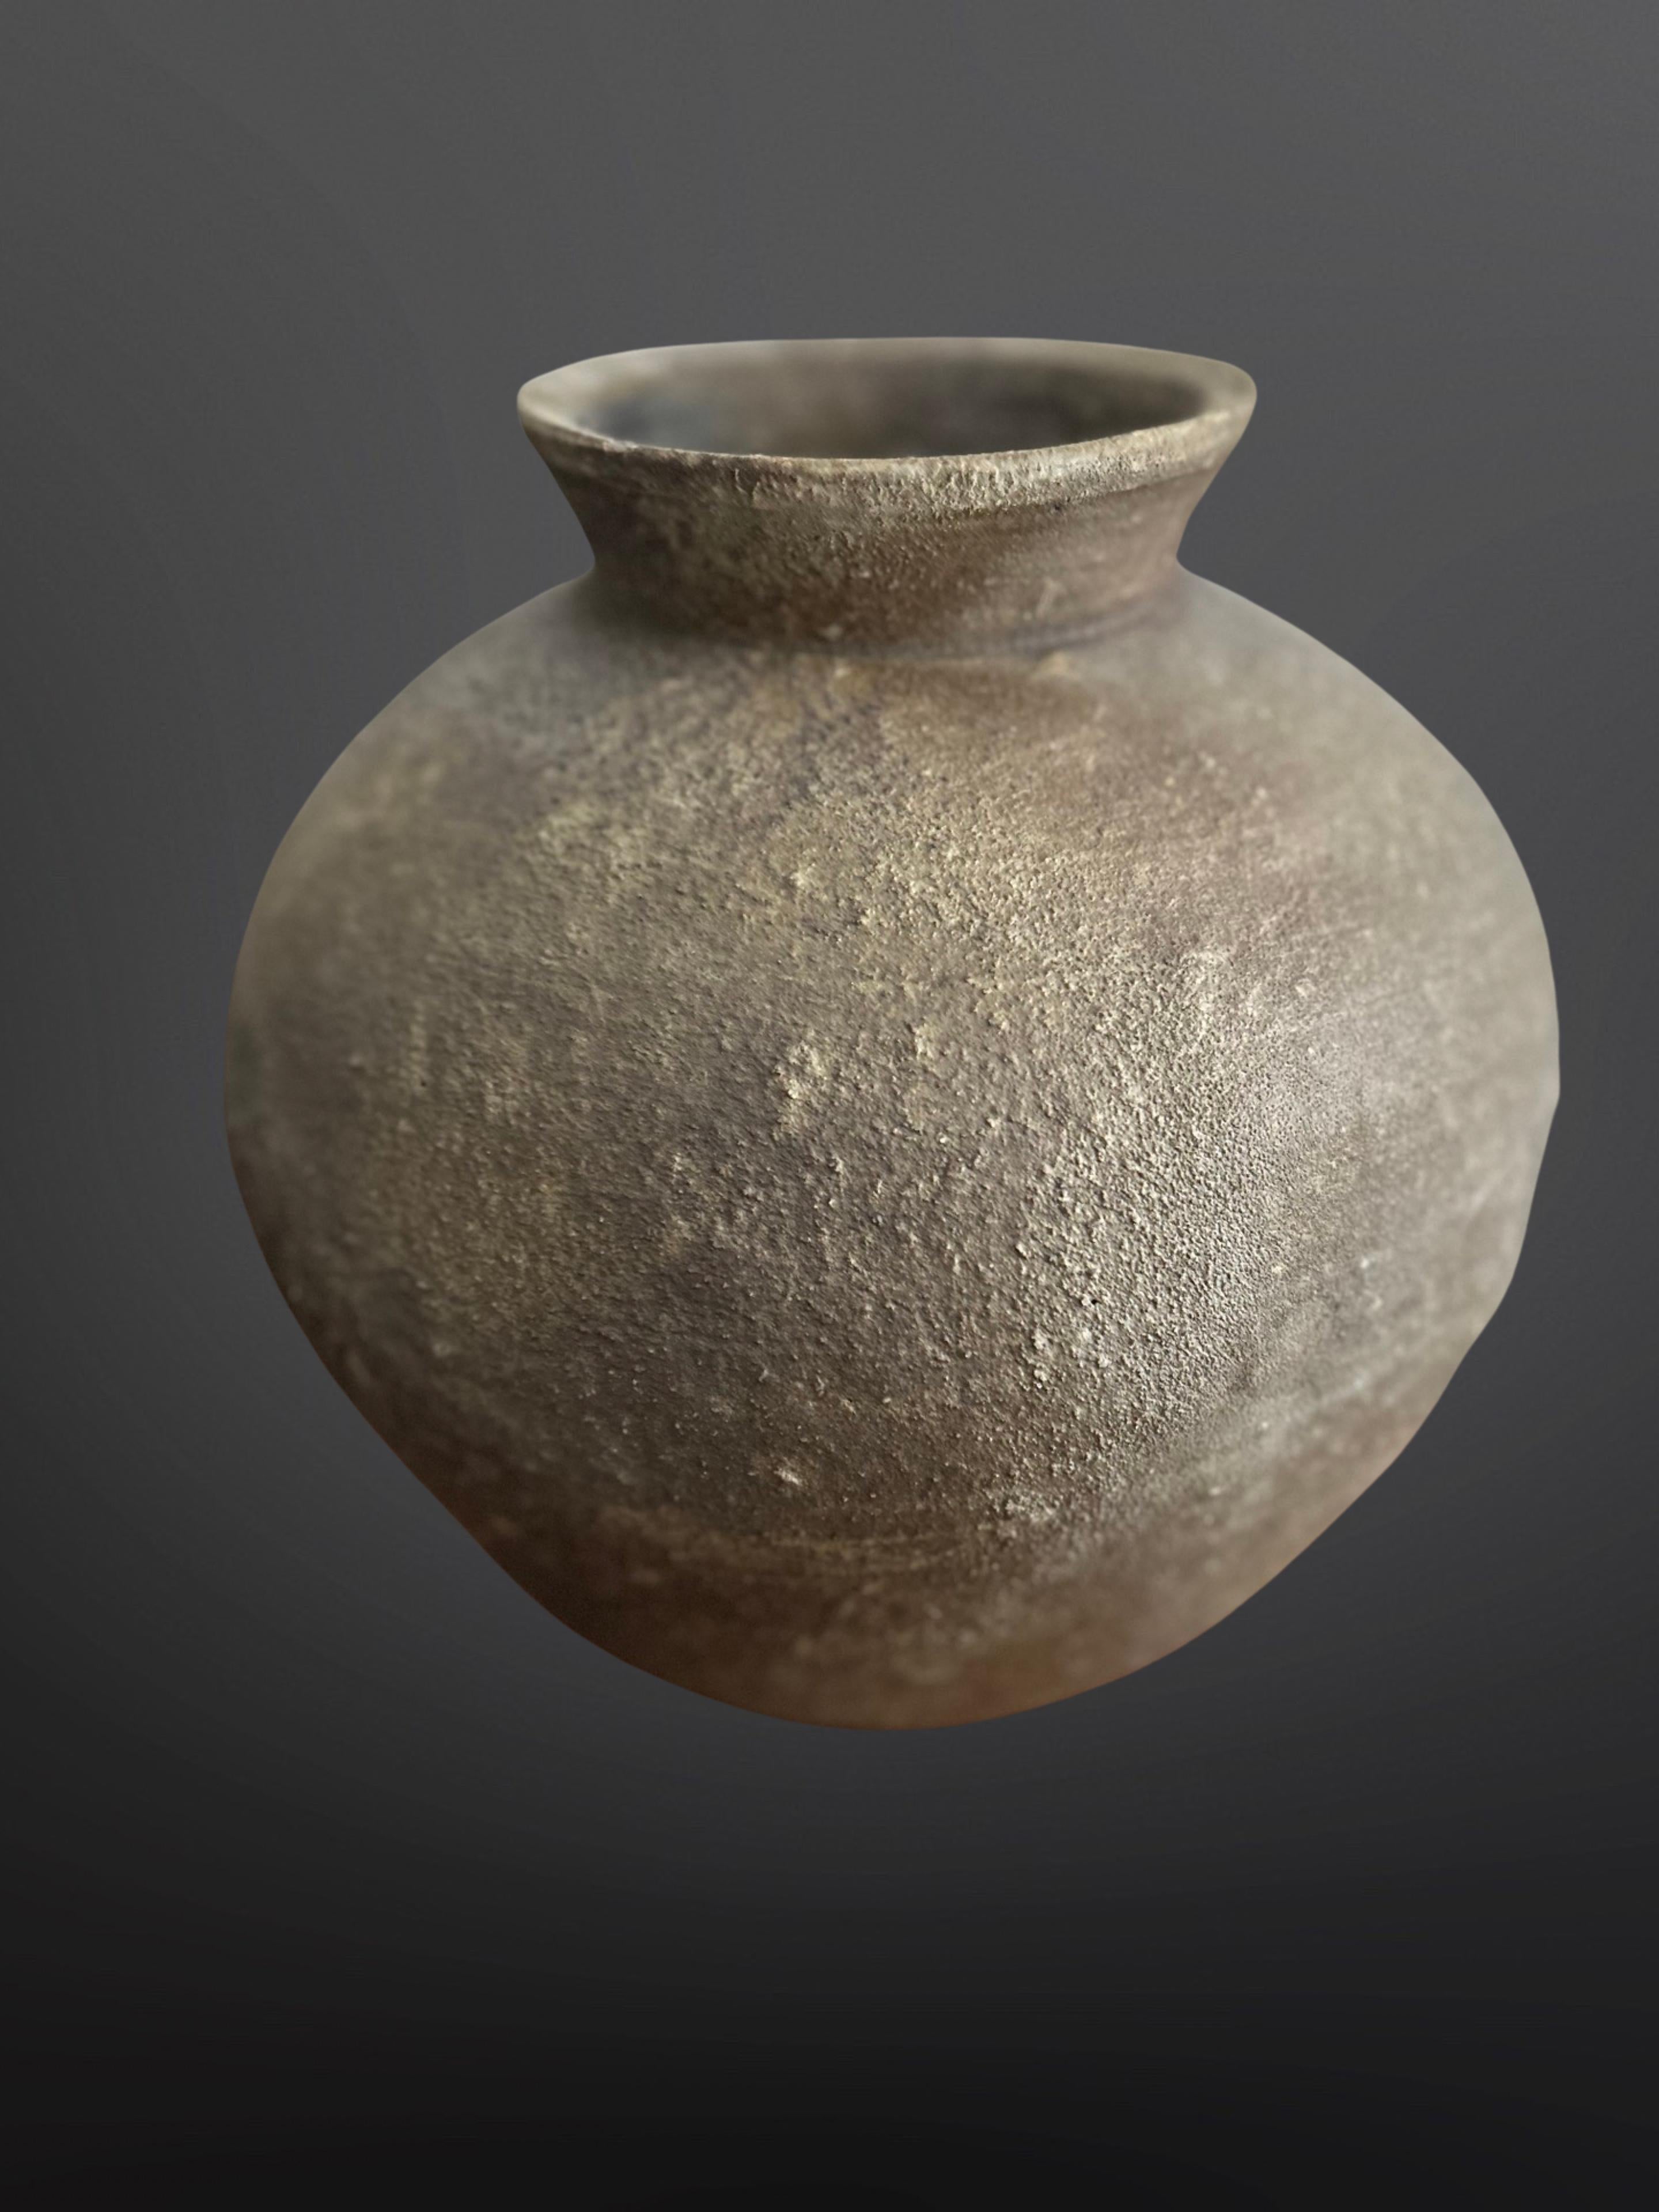 Naoe Koide, a distinguished Bizen Ware Potter, reflected on his lifelong journey, one ignited by a profound curiosity about the concealed marvels within the world. In his childhood, he vexed his parents by disassembling electrical appliances with a